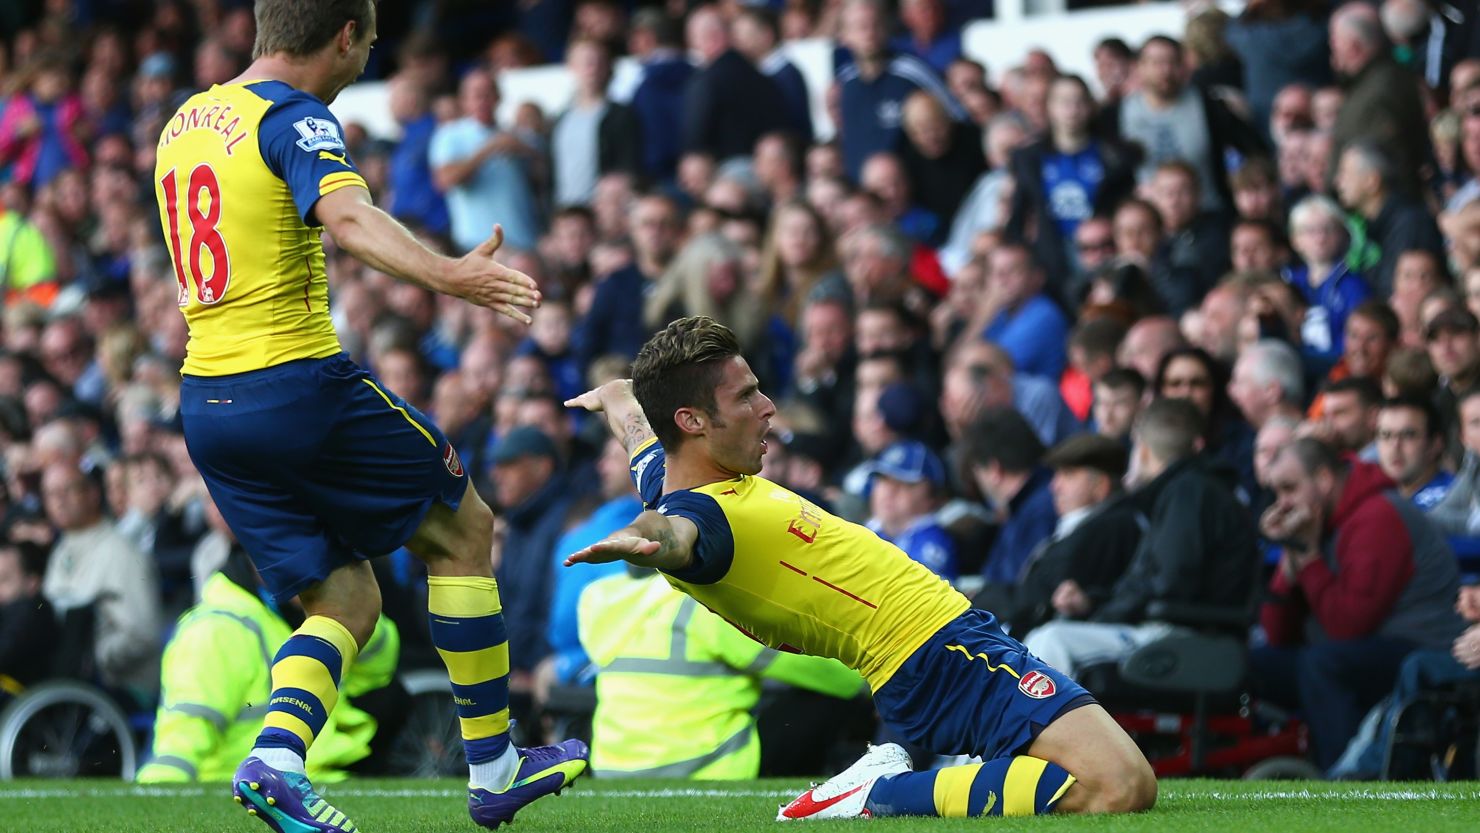 Olivier Giroud celebrates scoring a late equalizer against Everton at Goodison Park on Saturday.